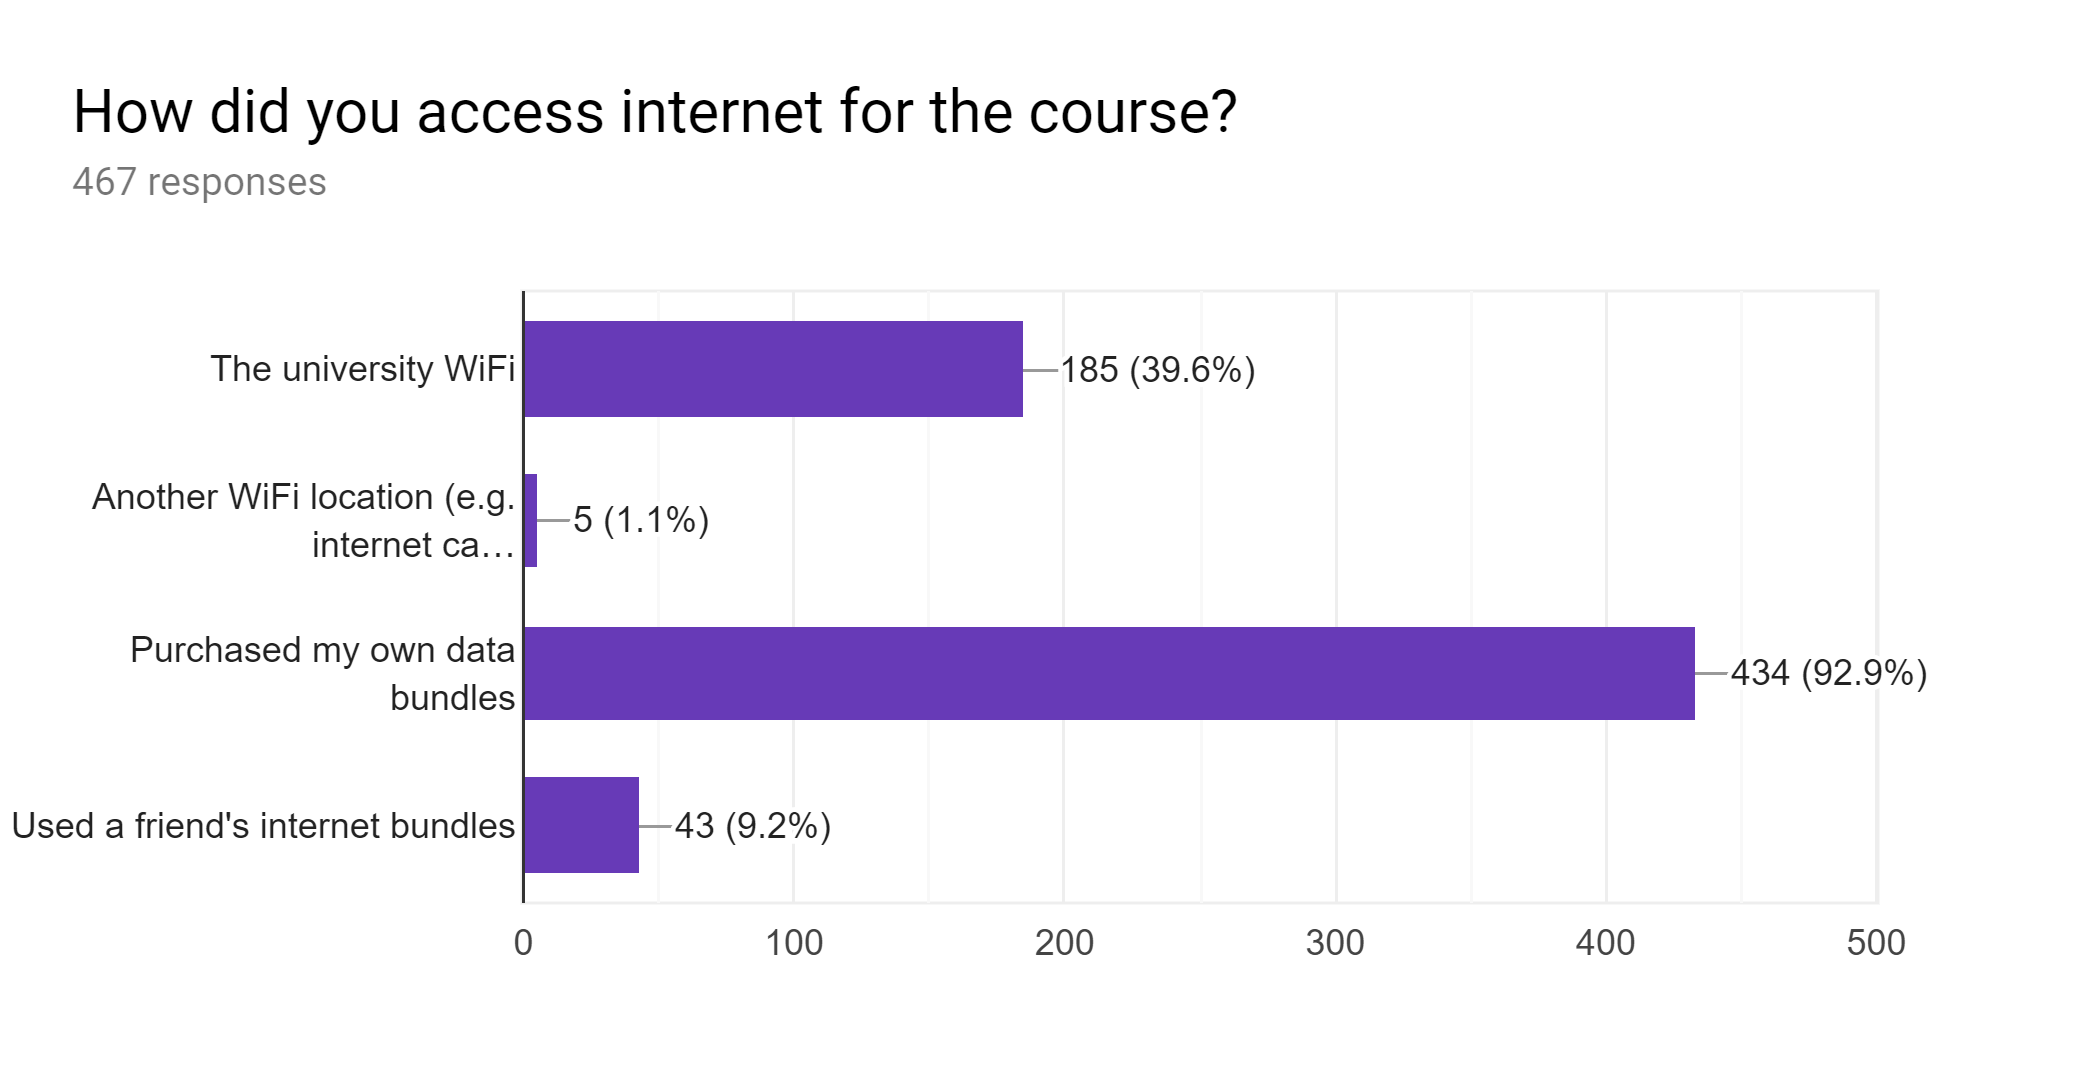 How did you access internet for the course? 467 responses. Purchased my own data bundles: 434, the university WiFI: 185, a friend's internet bundles: 43, another WiFi locaation: 5.